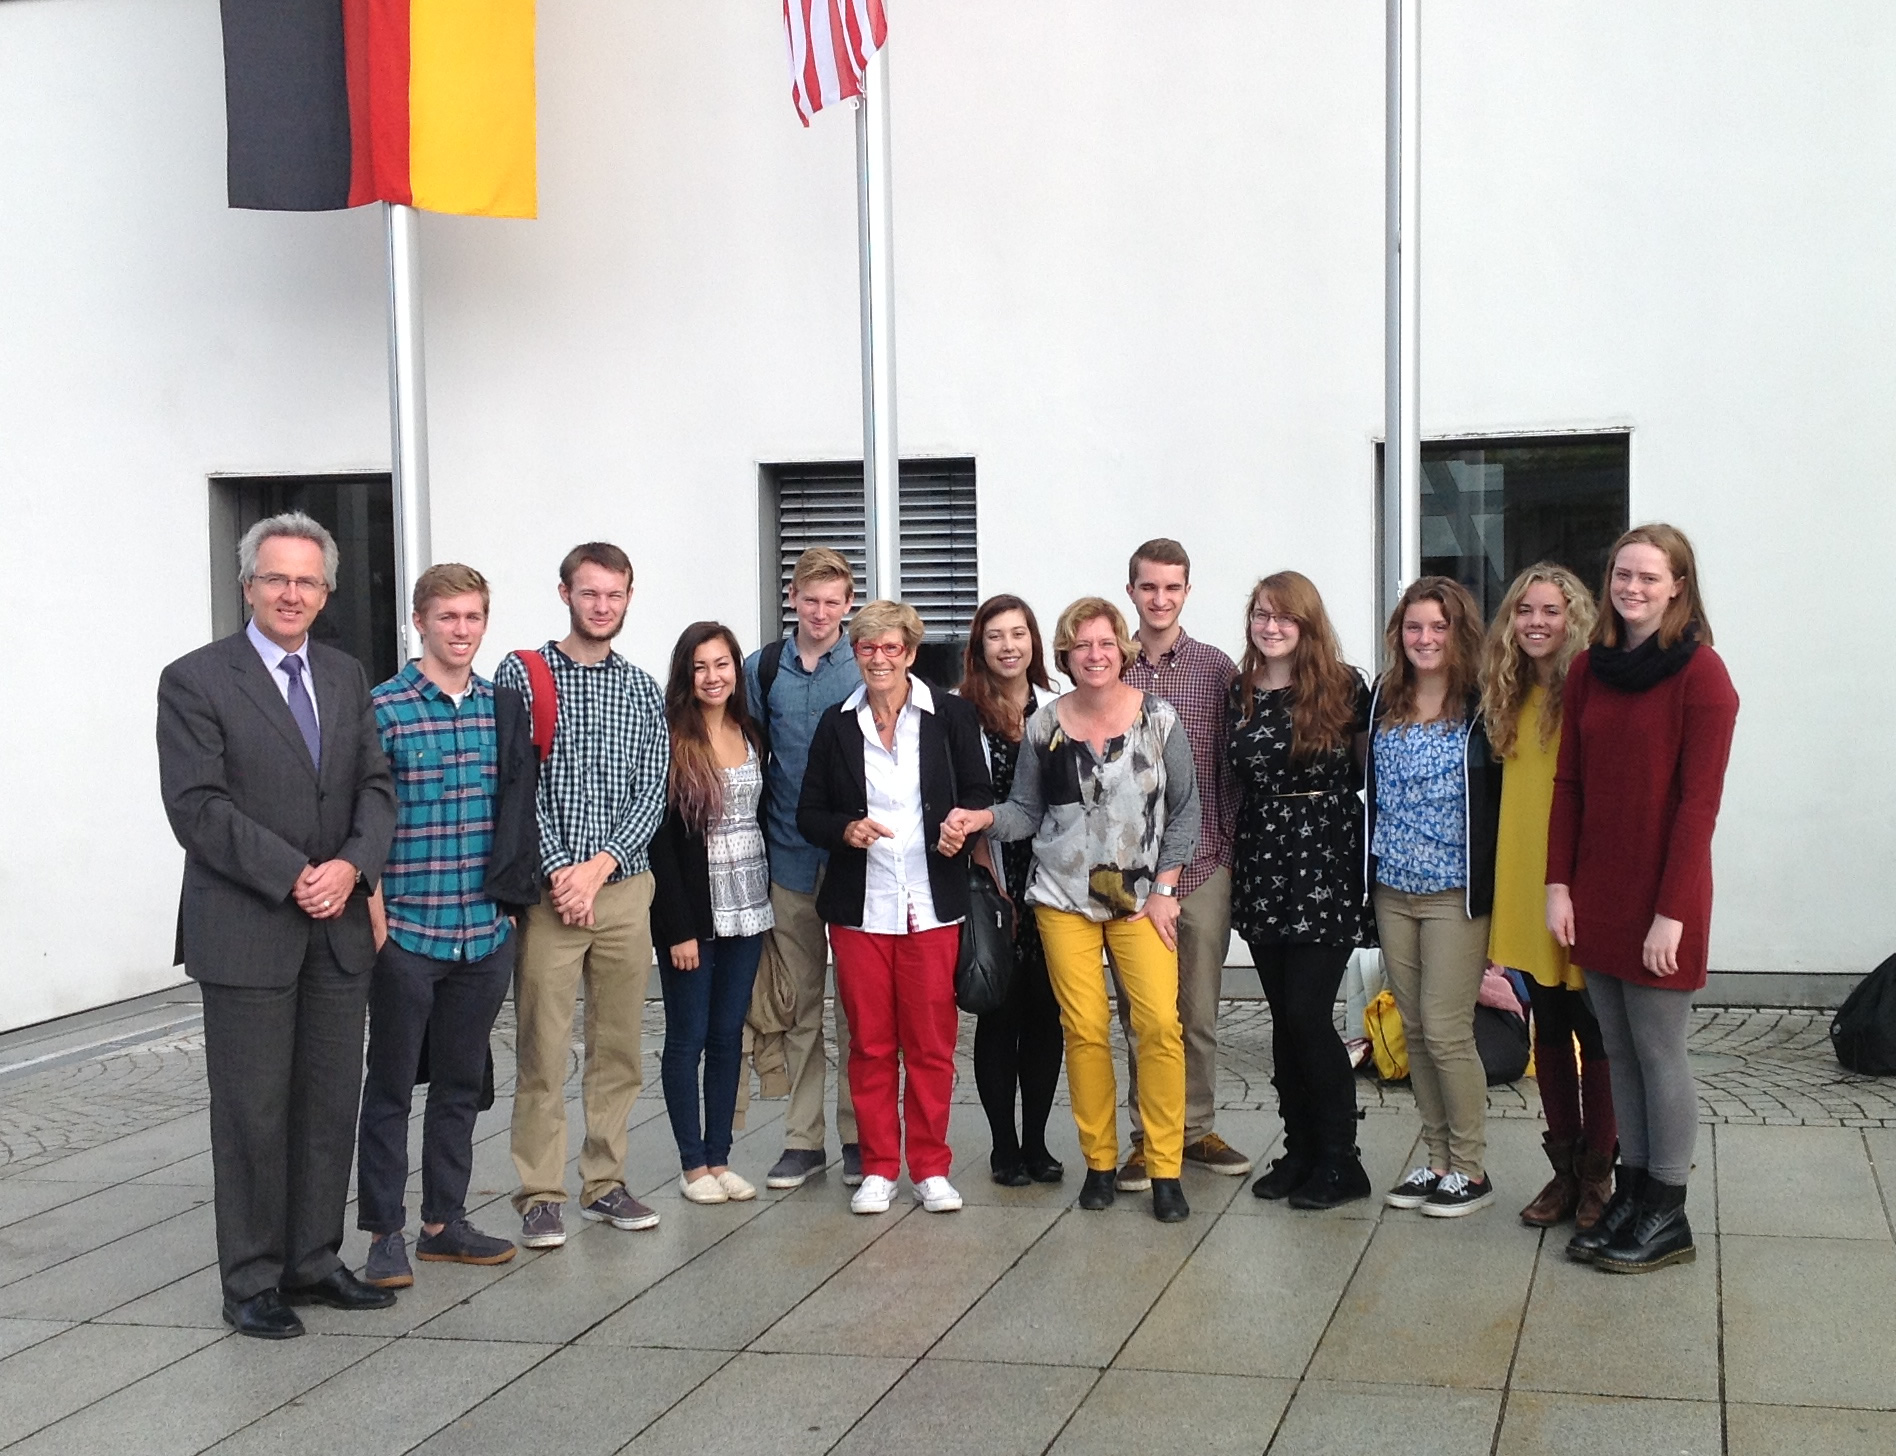 Pictured in Germany is the Mayor of Waiblingen with Tallwood students (from left to right), Alex Young, Georges Stevens, Chelsea Schmidt, Cole Aydar, German teacher Angelika Wagner, Elizabeth Roe, Tallwood teacher Andrea Machesney, Alexander Damm, Alainah Turner, Kelsey Faber, Enya Pfeiffer and Caroline Delaney.